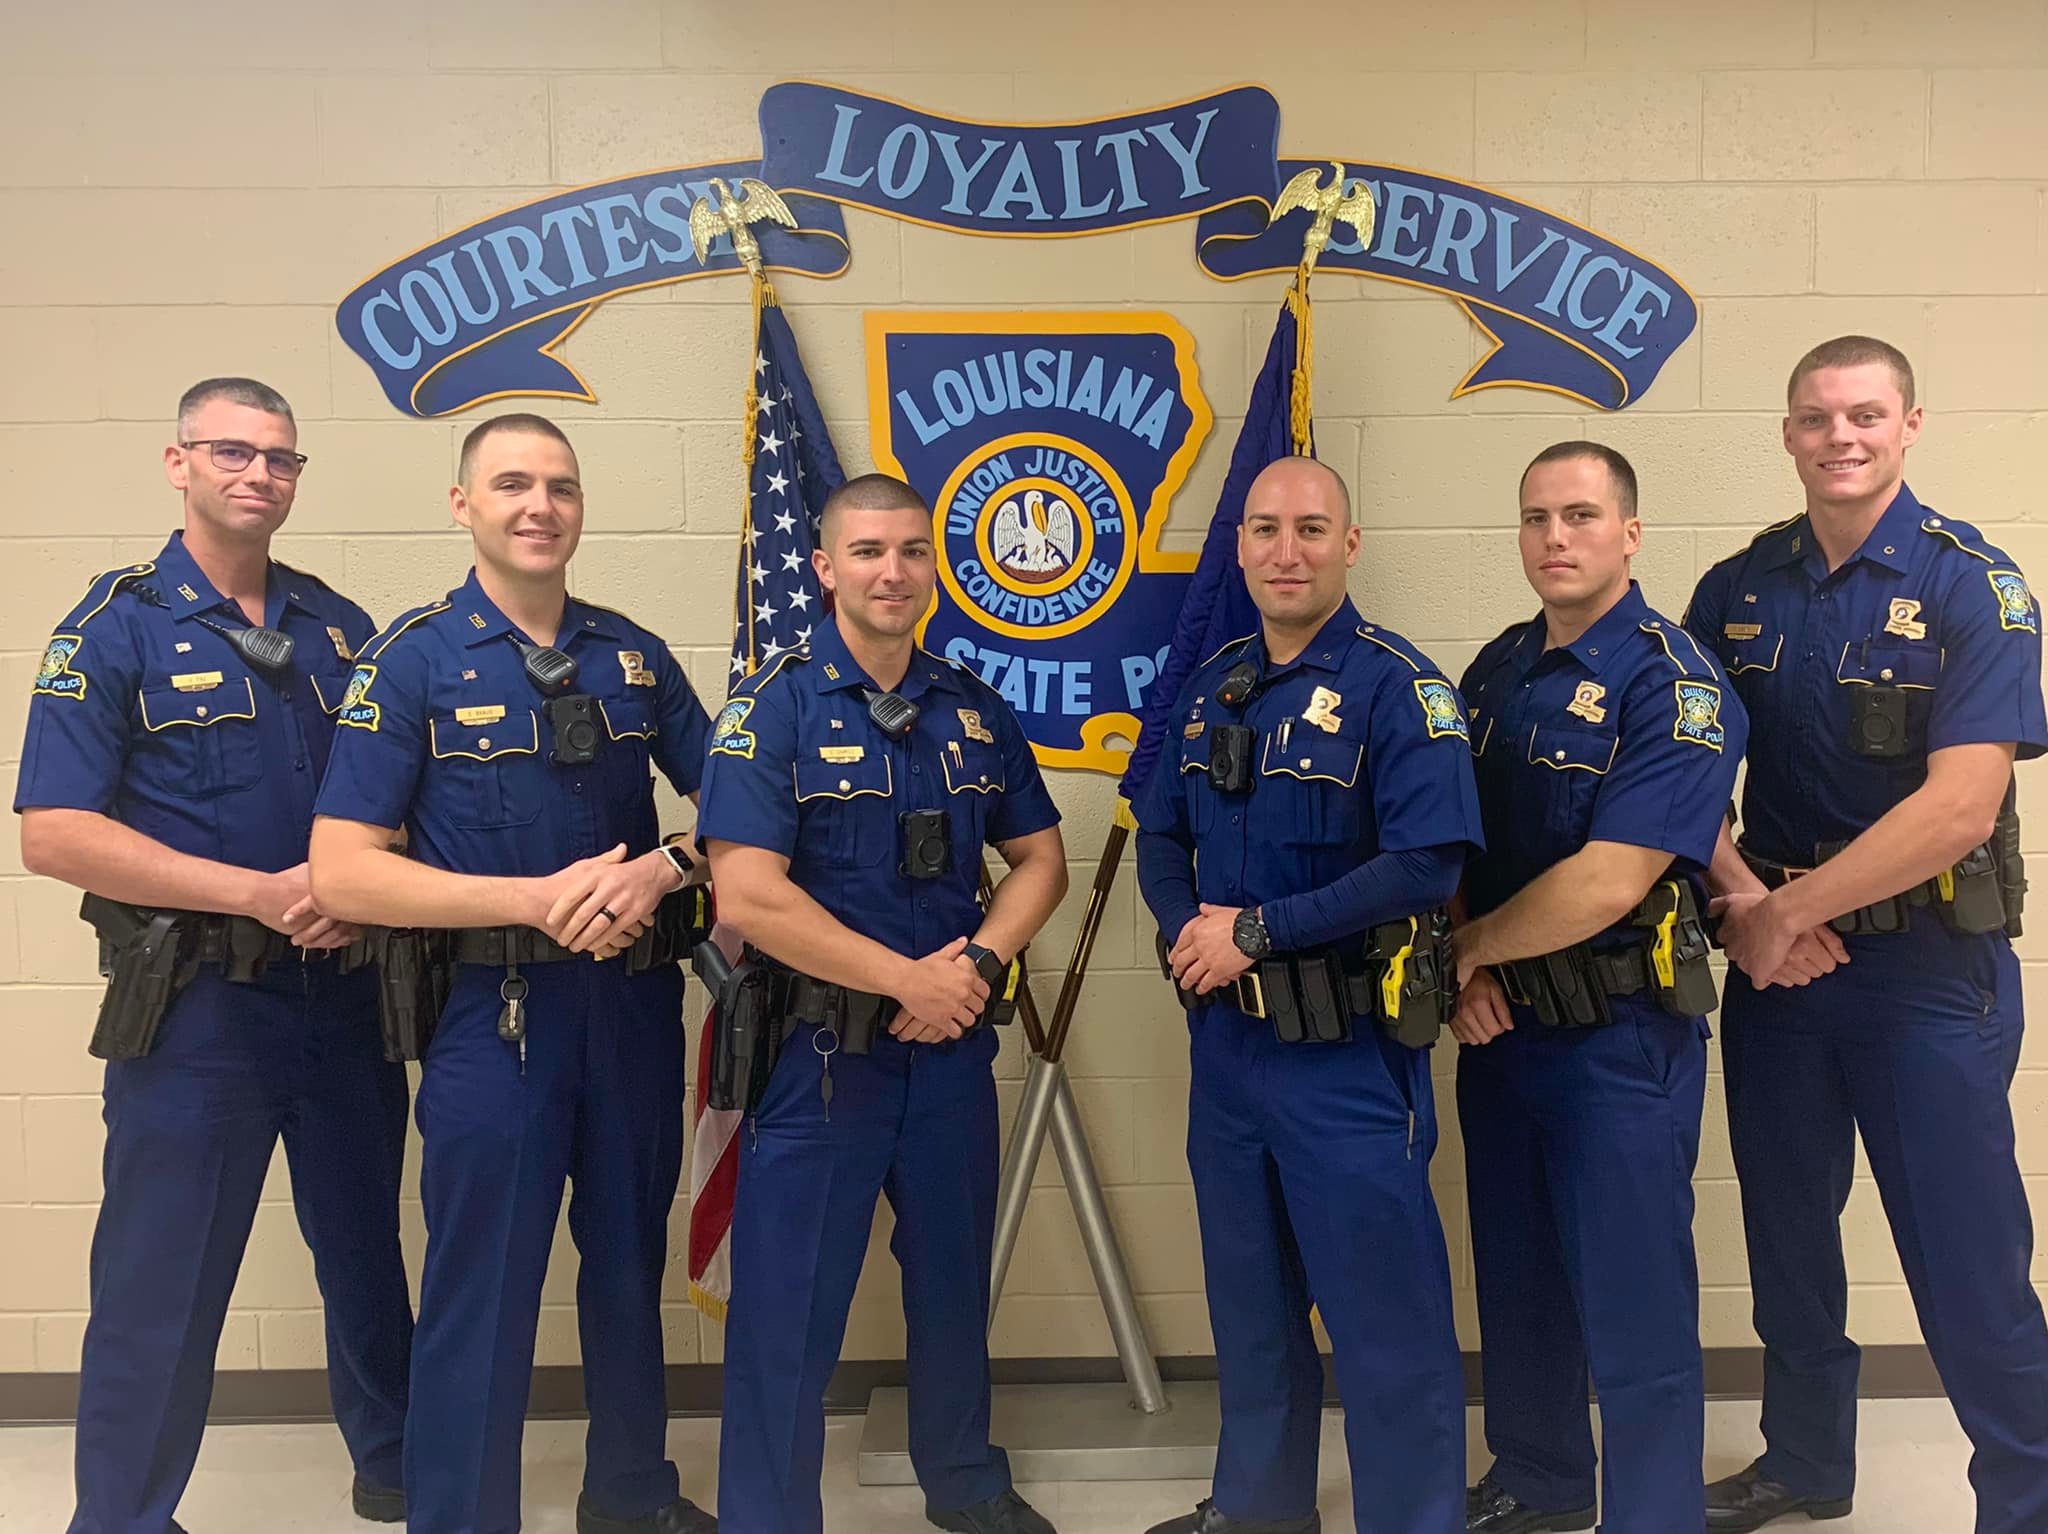 Six new Louisiana State Police Troopers have joined the ranks of Troop